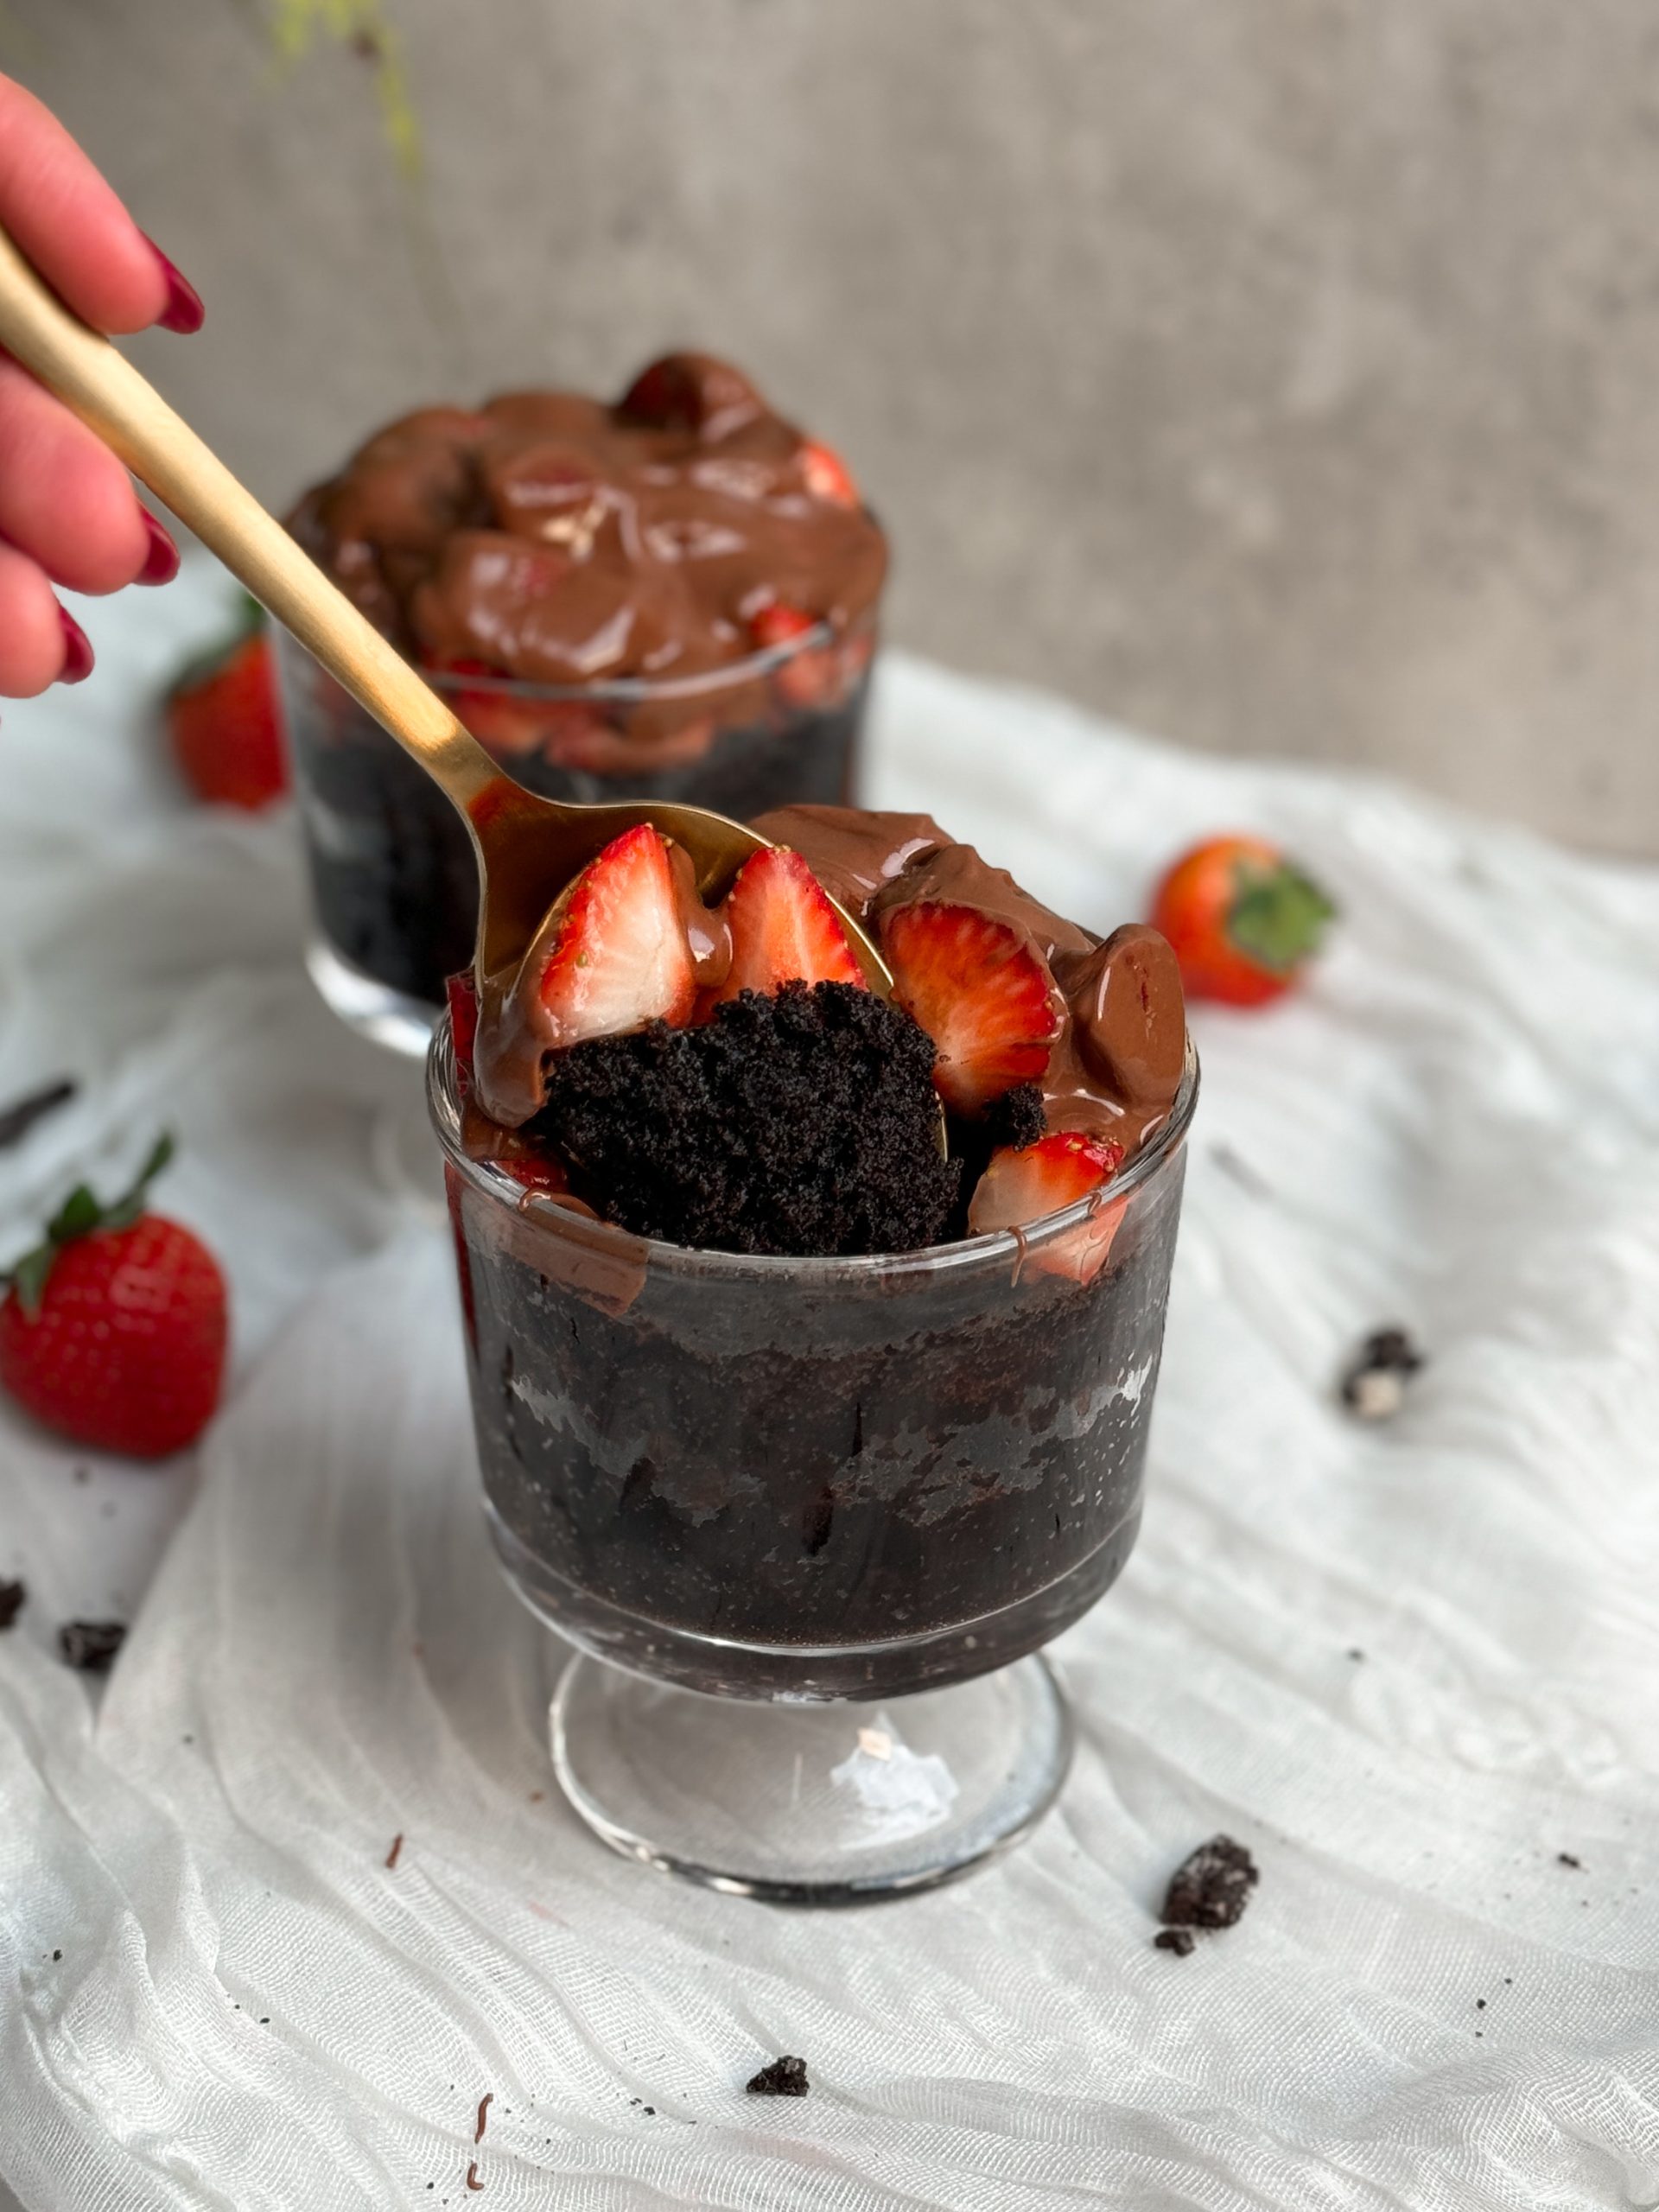 chocolate strawberry mug cake with a spoon pulling out a bite showing the moist rich texture inside